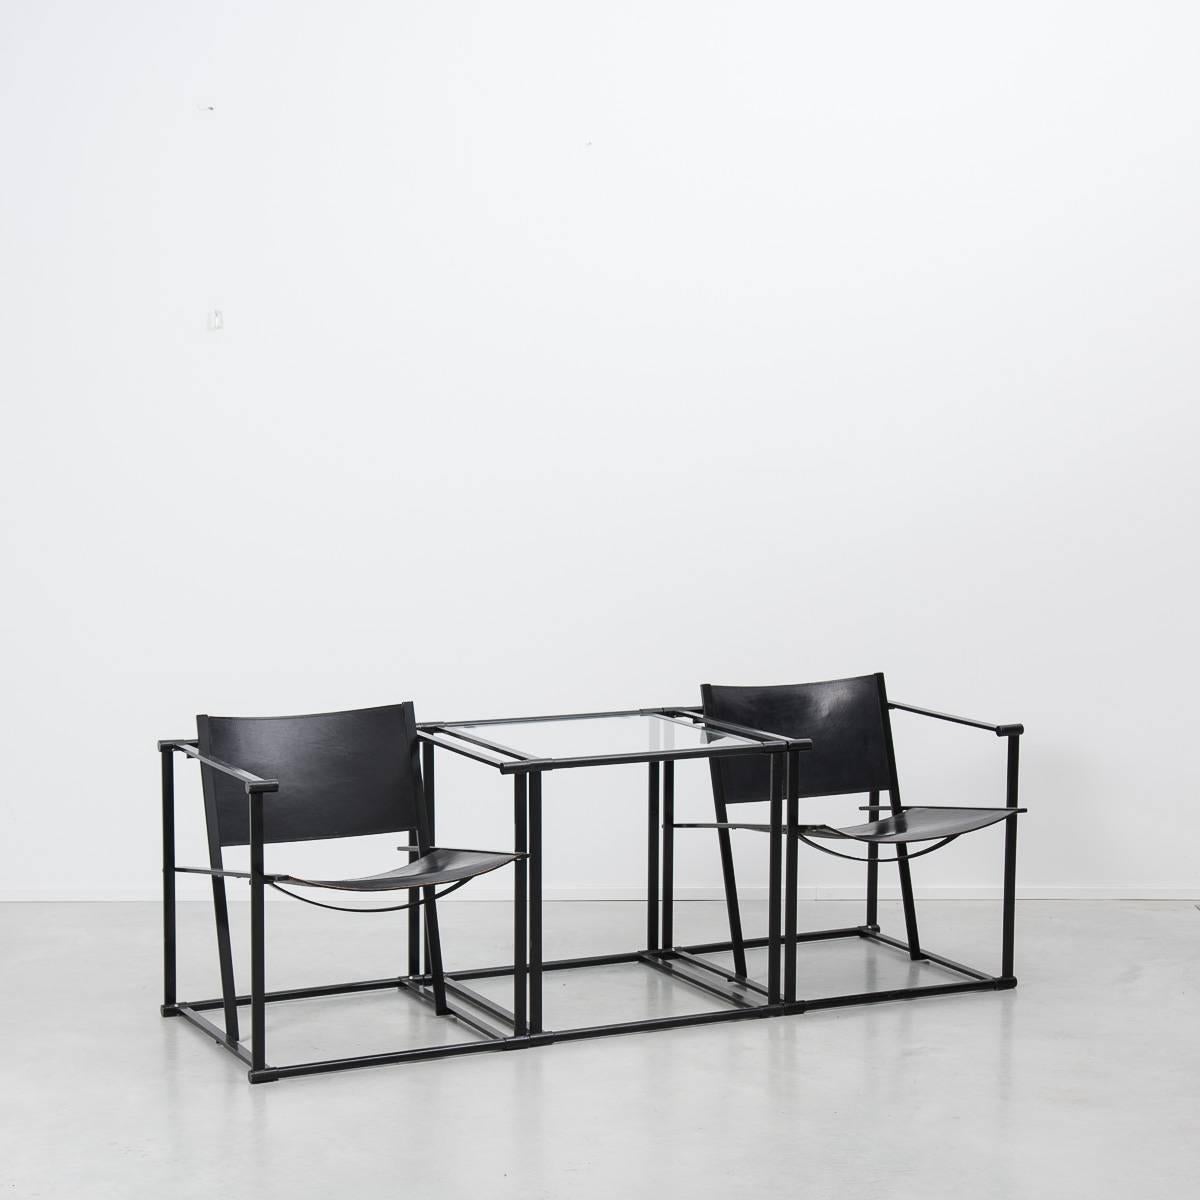 Radboud Van Beekum FM62 chairs and TM61 table,
Pastoe, Netherlands, 1984.

A geometric chair set designed by Radboud Van Beekum, constructed from folded steel with leather seating. Following in the tradition of the De Stijl movement the chairs